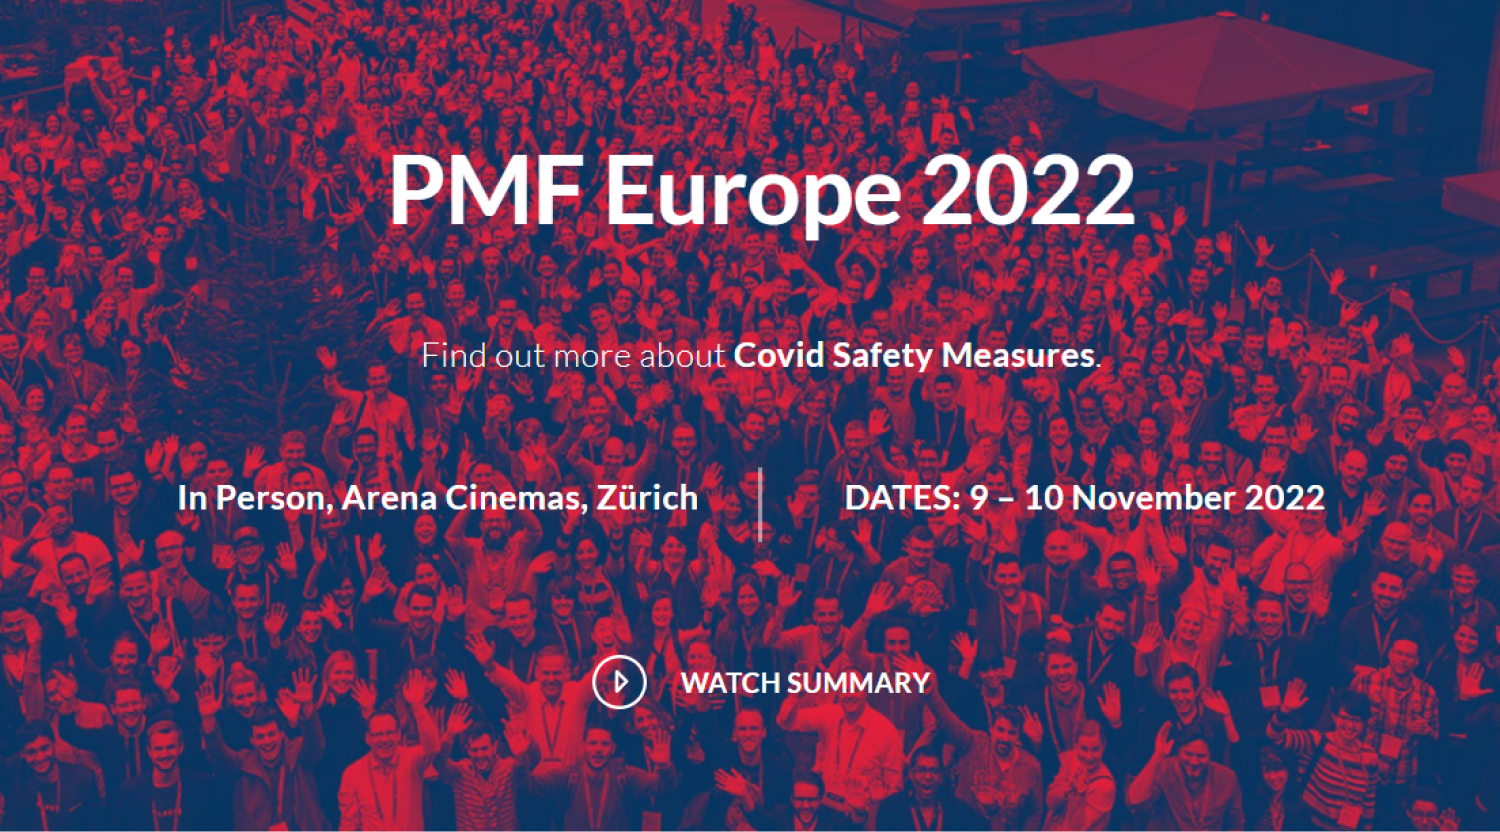 Product Management Festival (PMF) Europe 2022